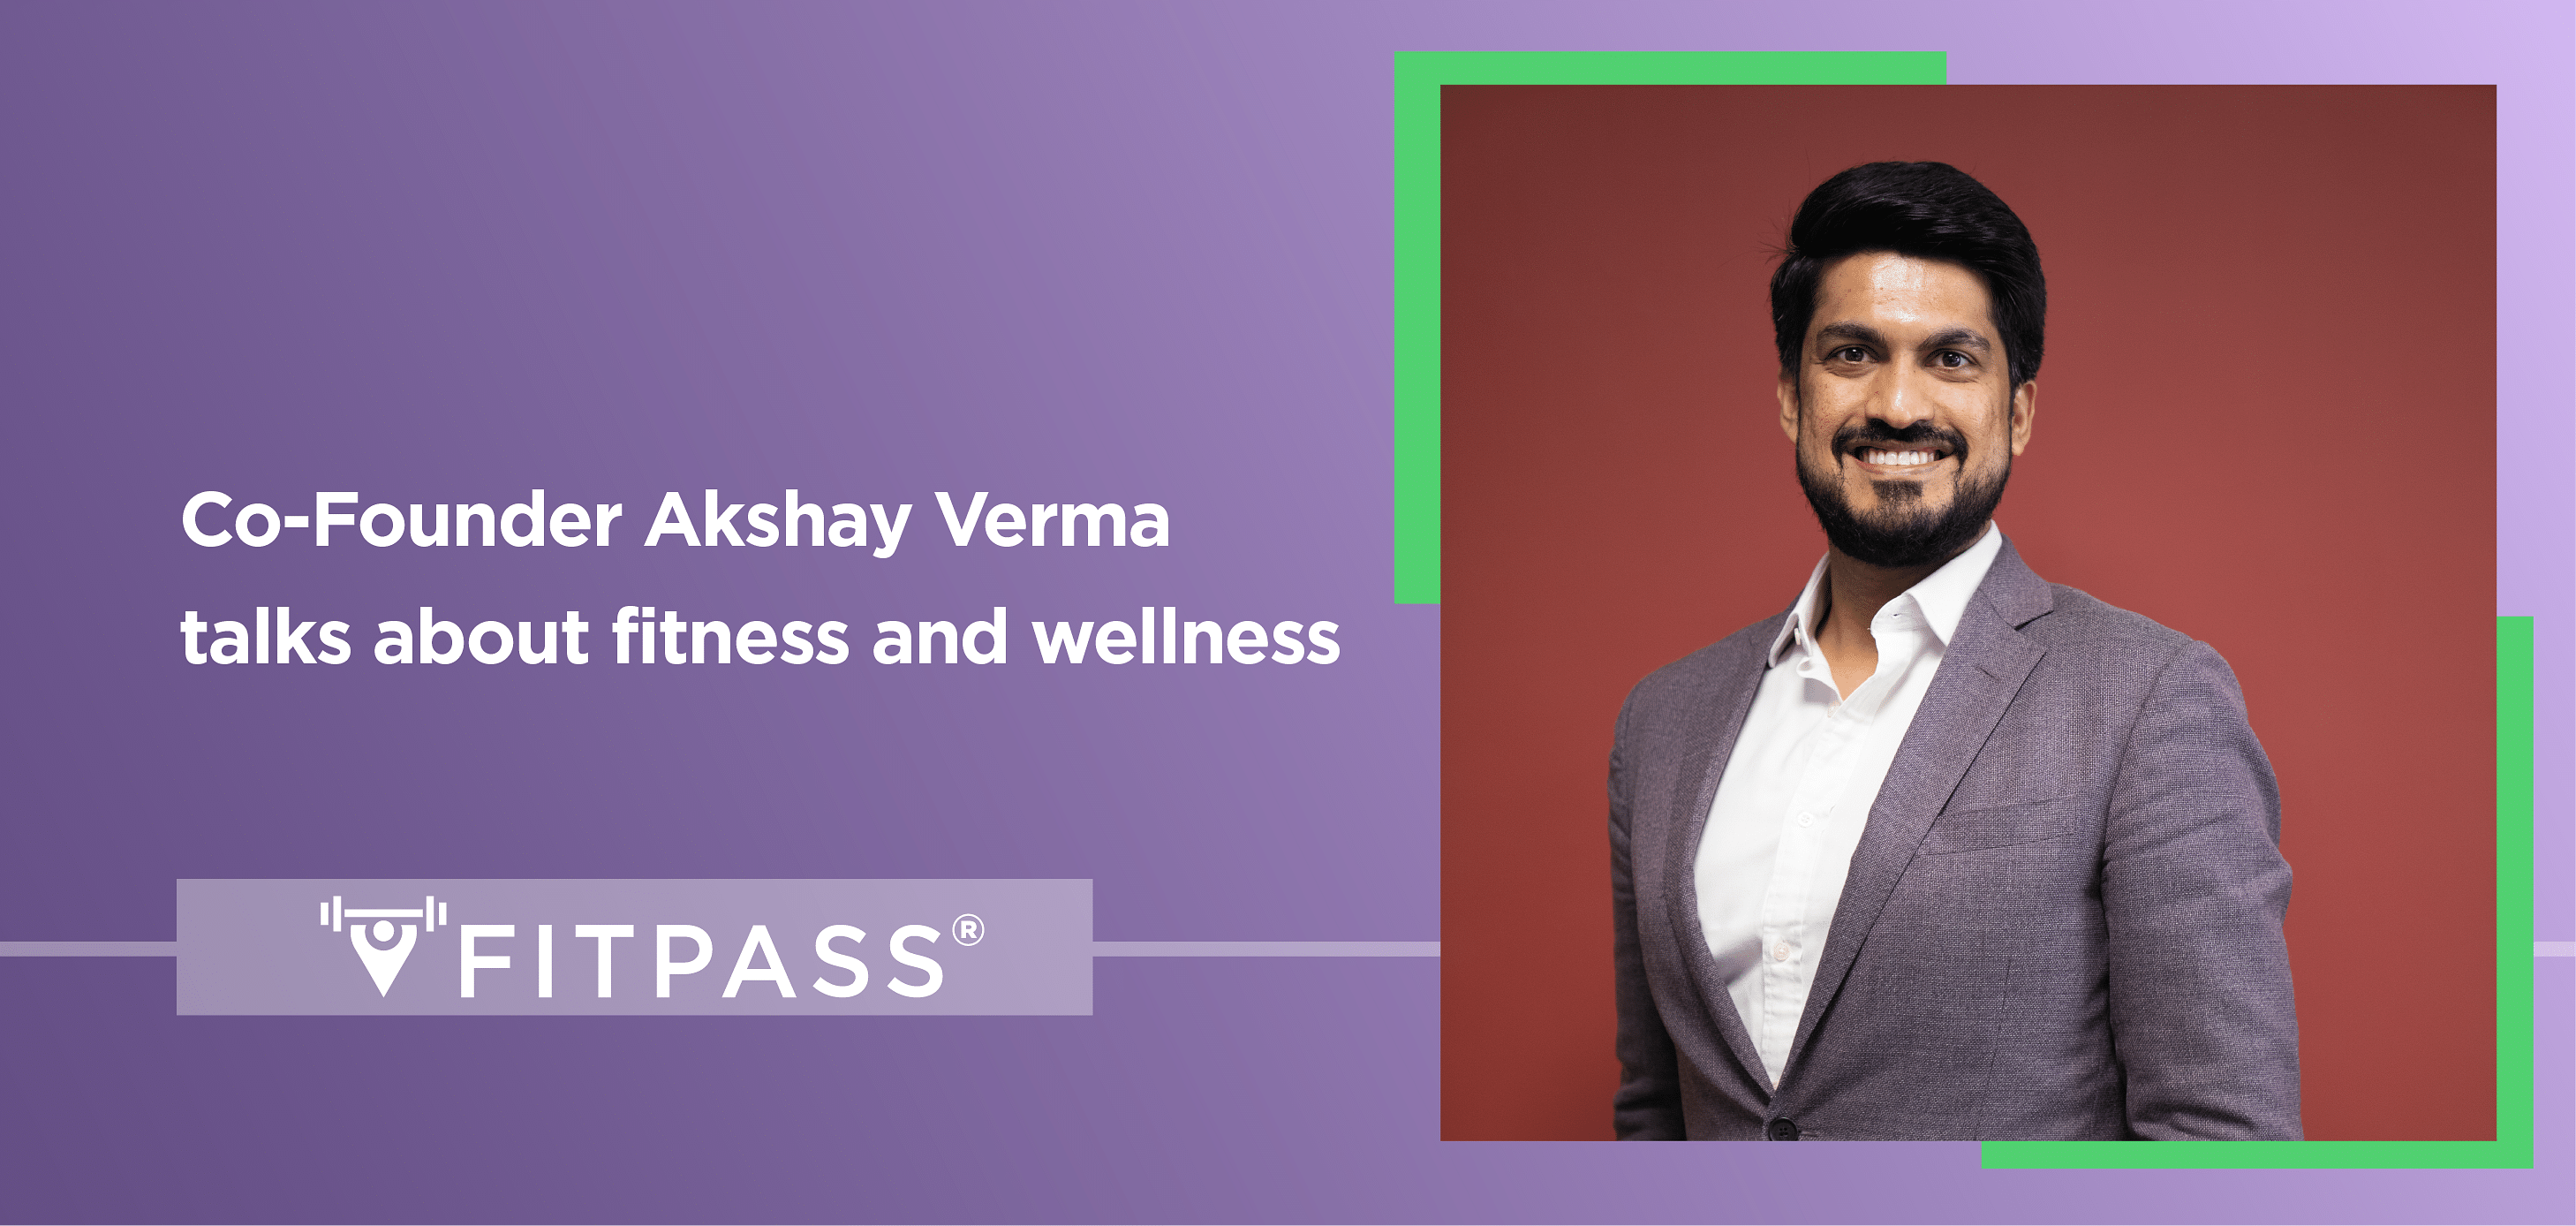 Co-Founder Akshay Verma talks about fitness and wellness